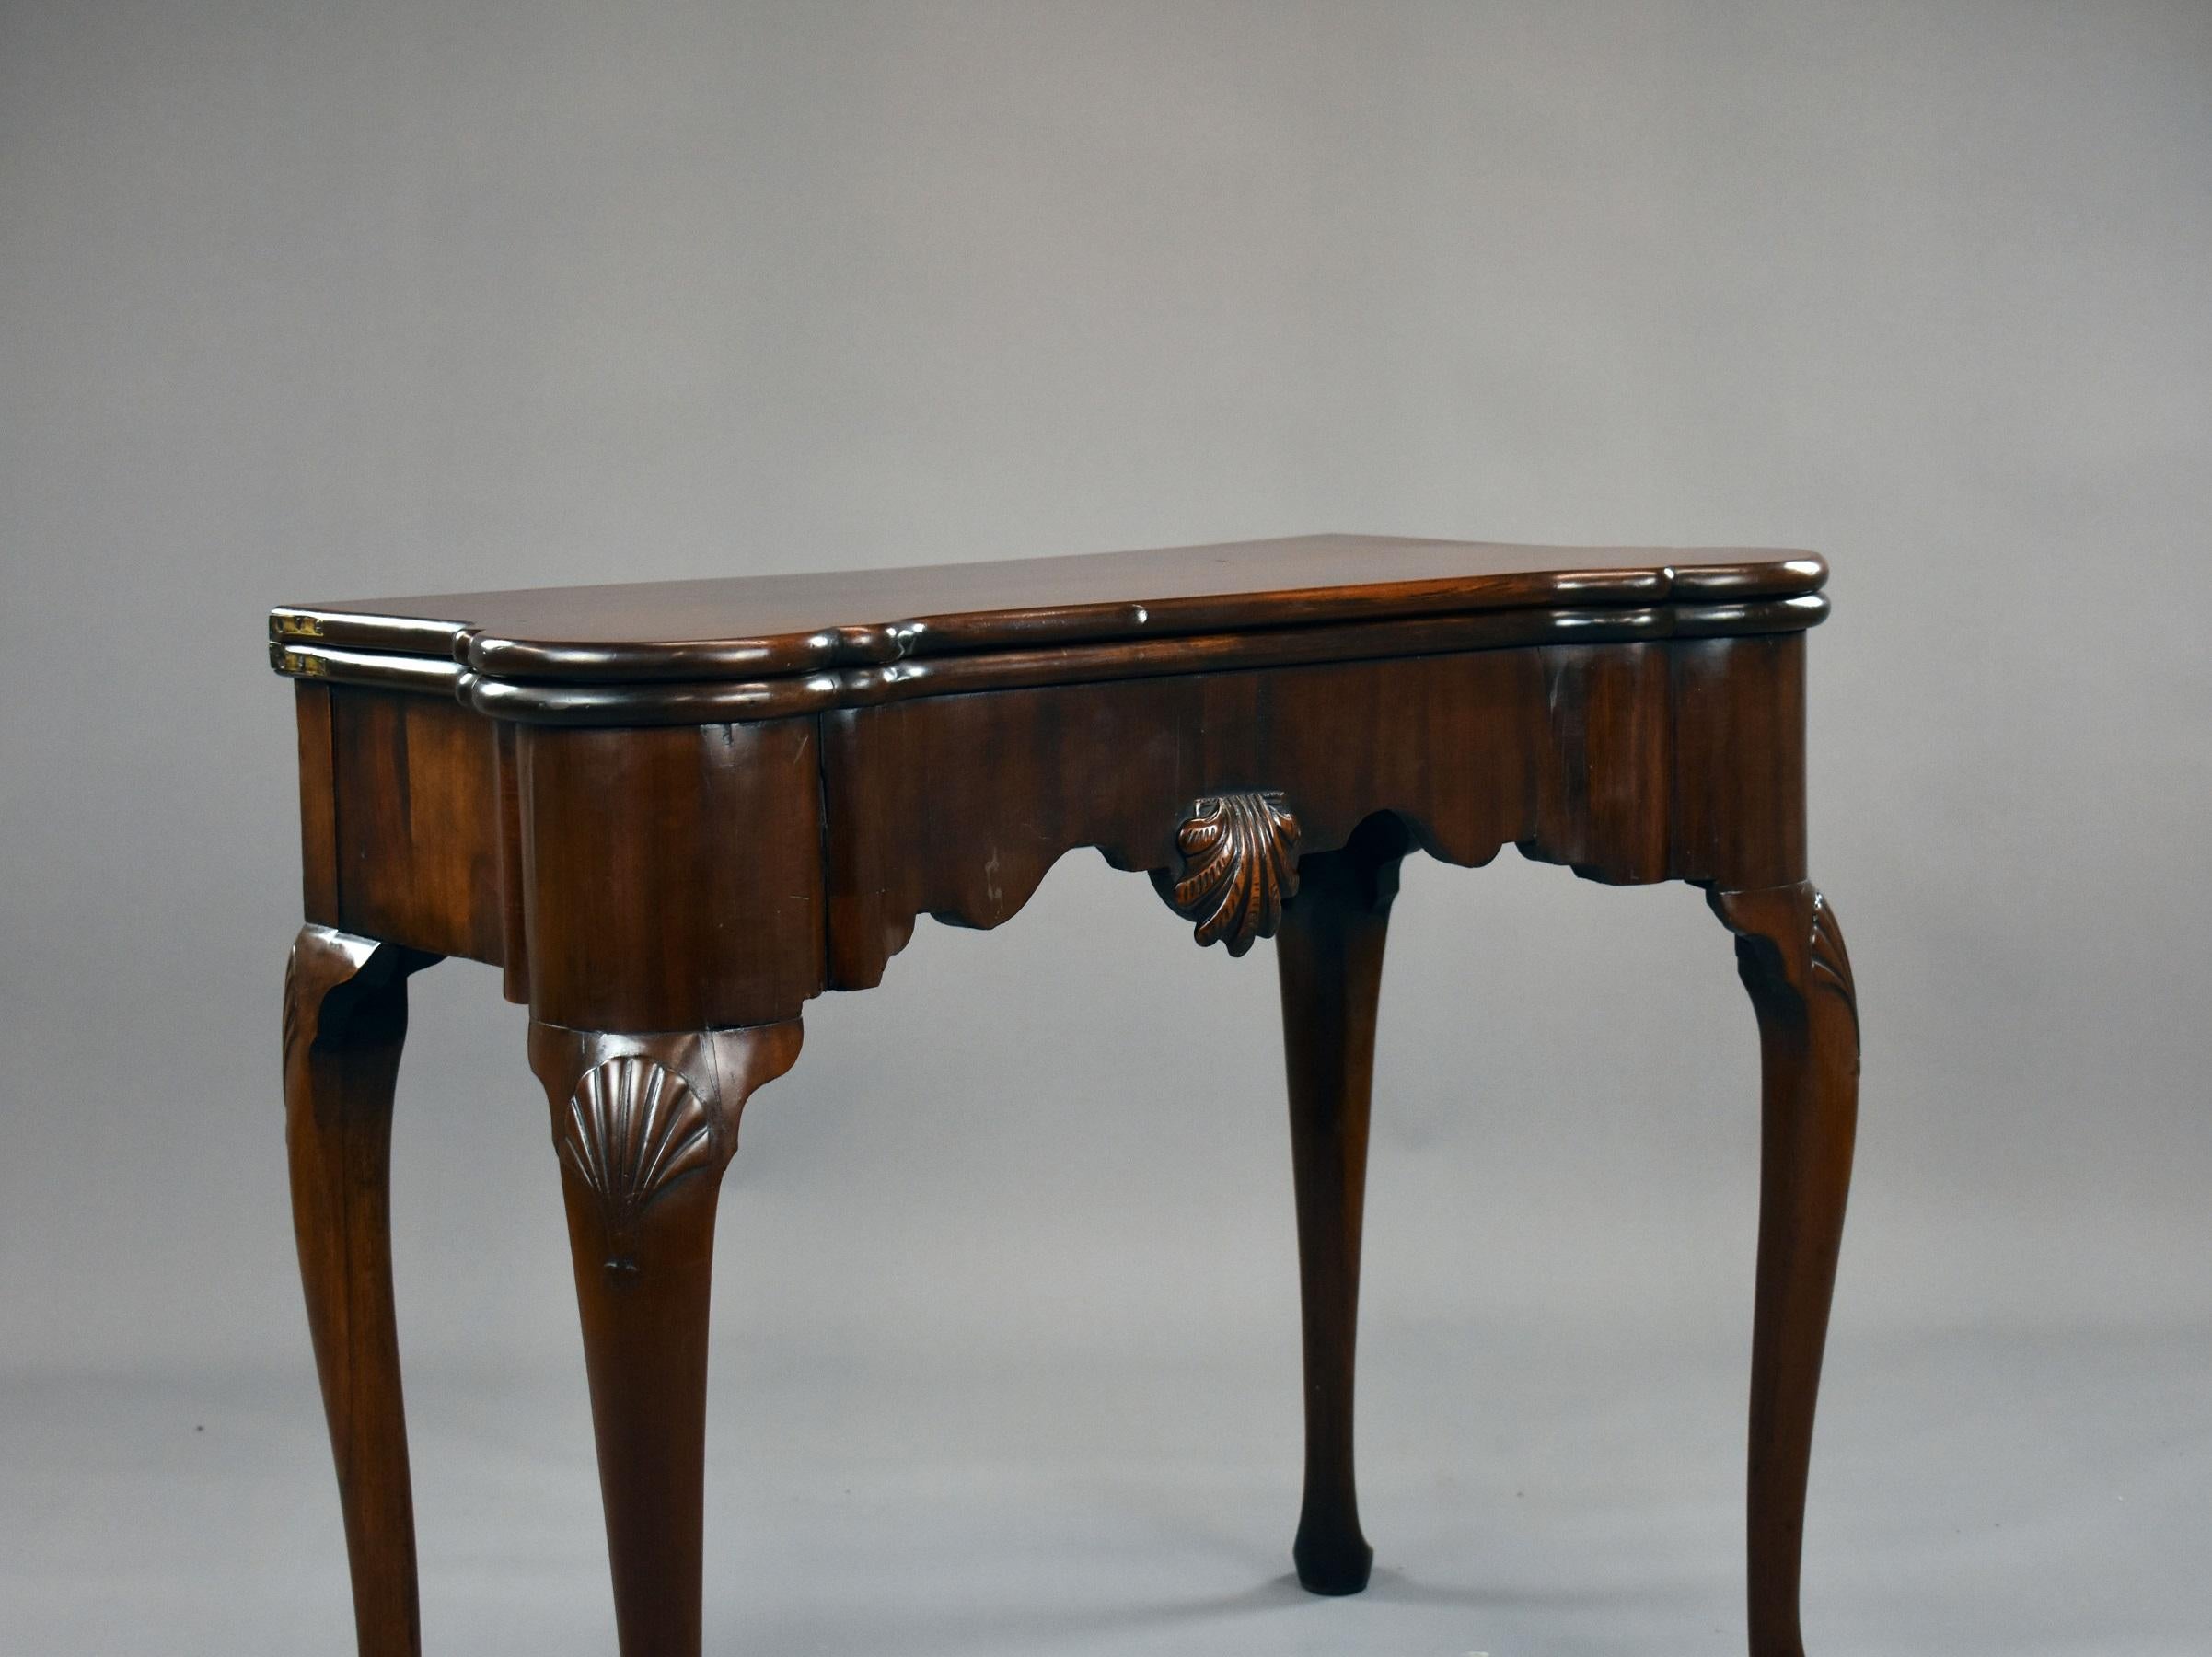 George II Irish Mahogany card table with carved scalloped shell on frieze, raised on shell carved cabriole legs on pad feet. The table opens to reveal a green baize lined playing surface inset with counter wells.